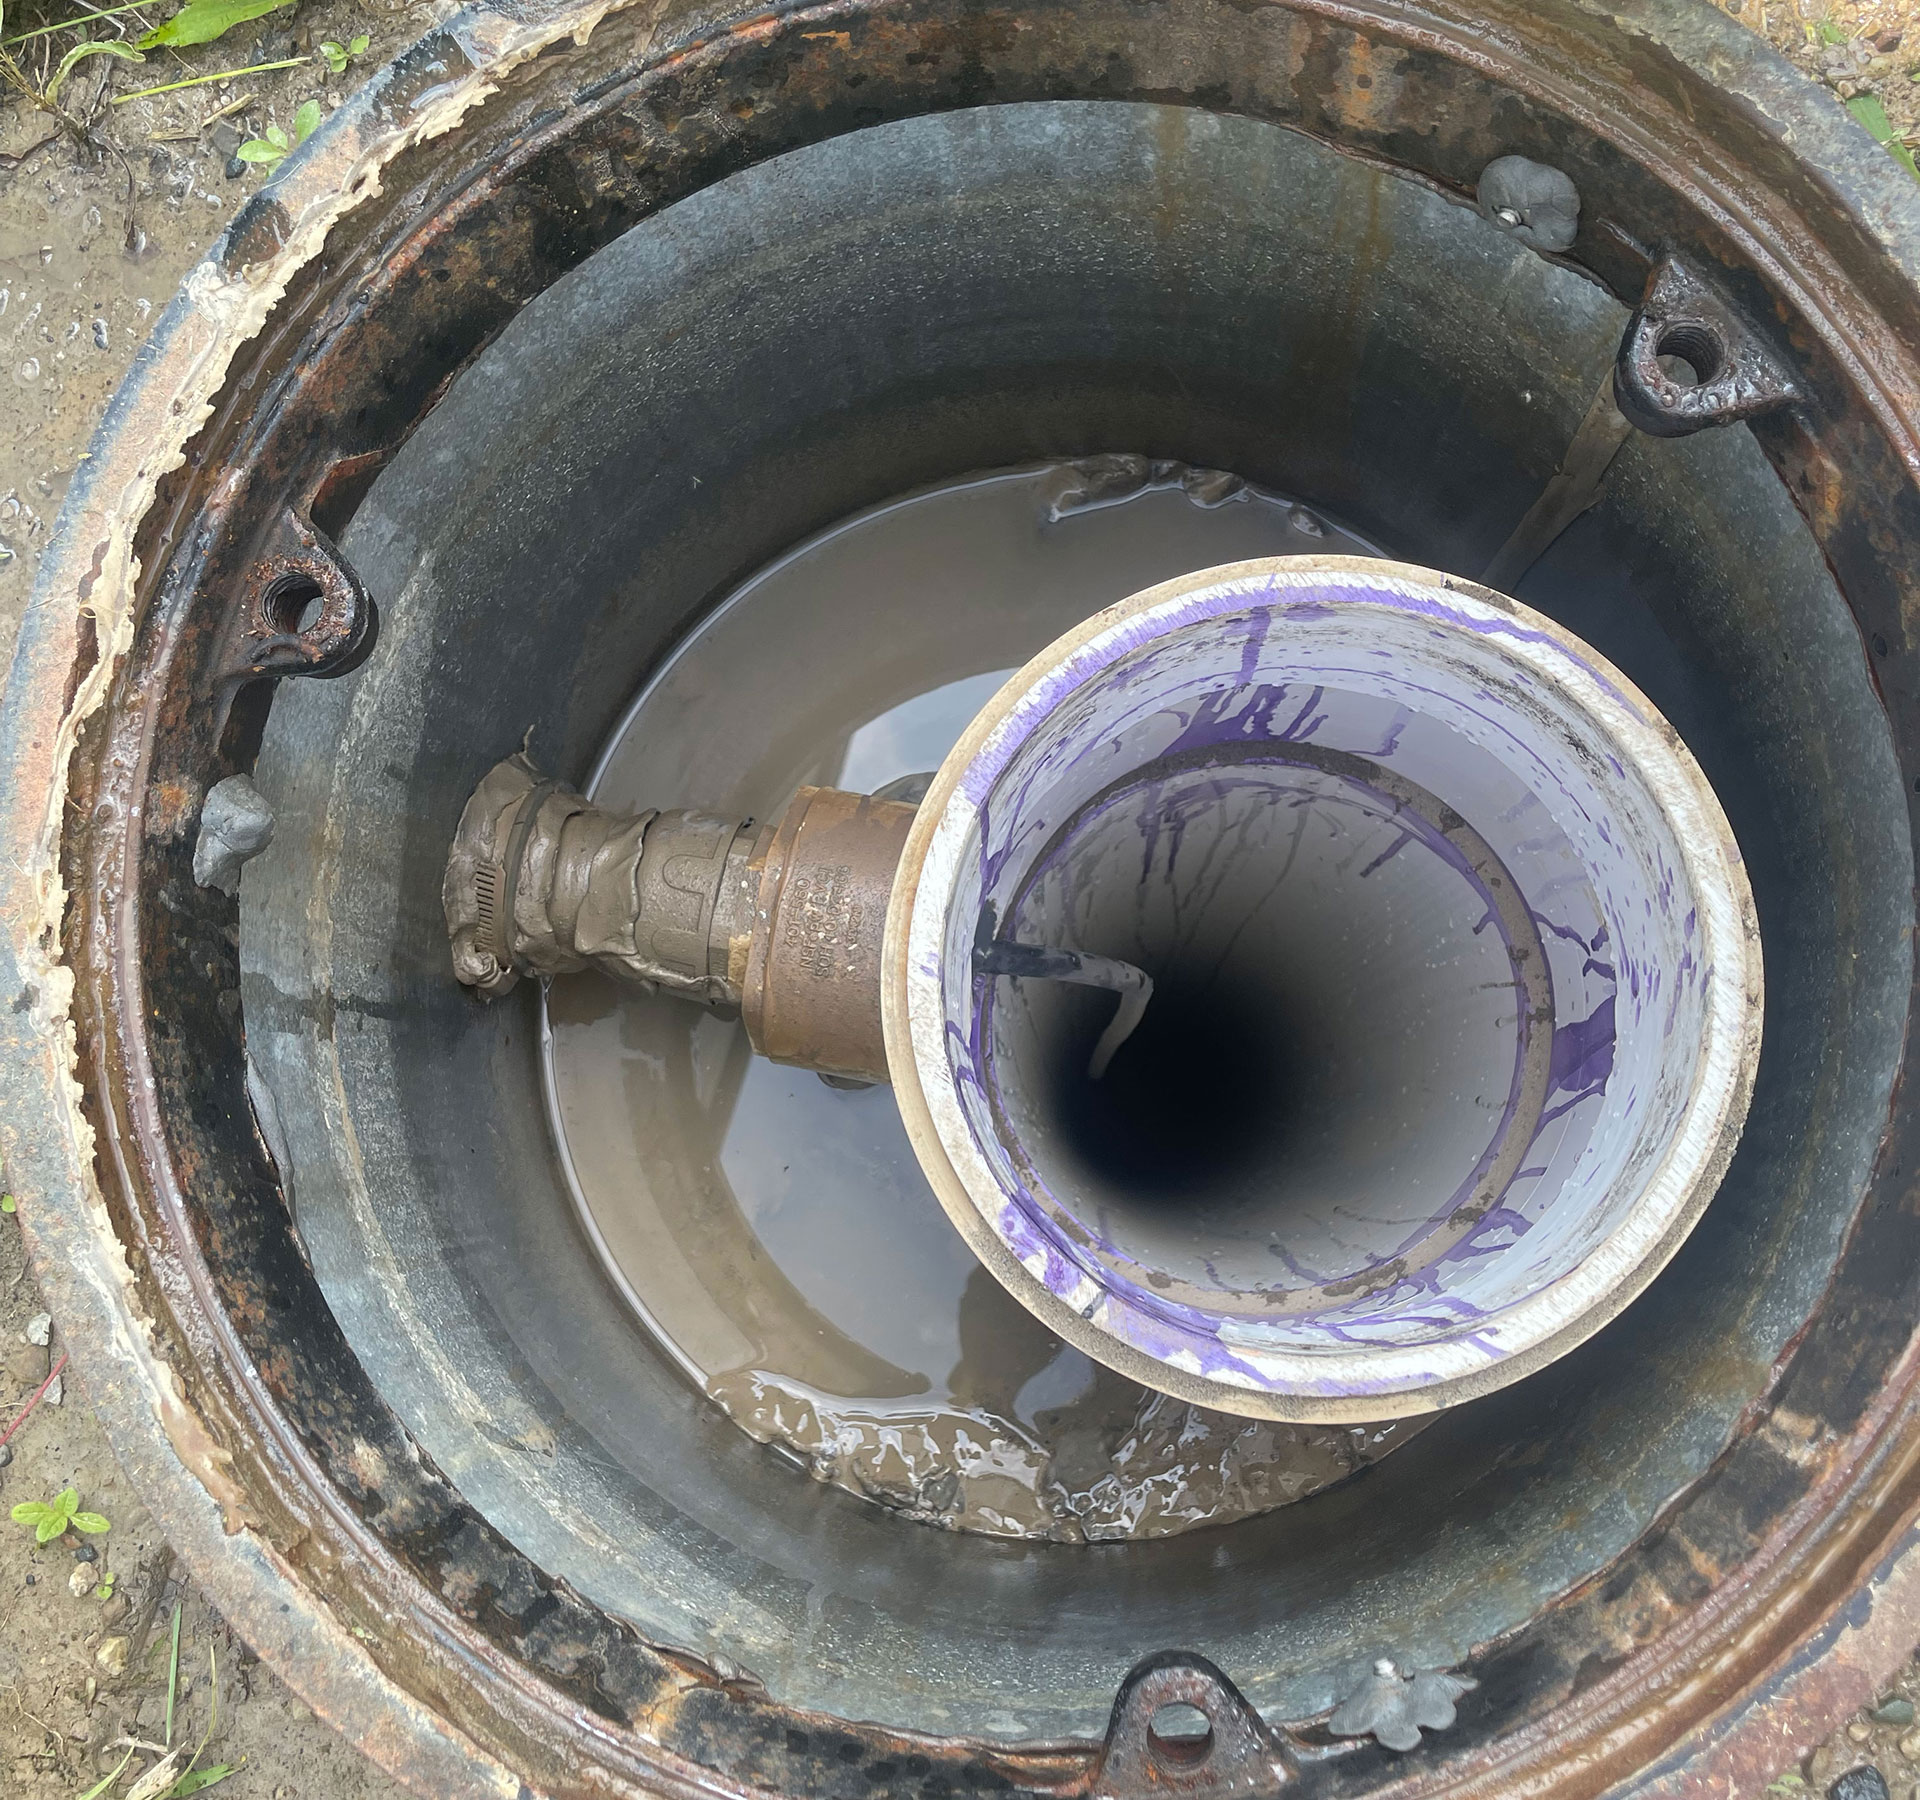 The 40T posthole instruments were deployed in cased holes to depths of down to 10 metres